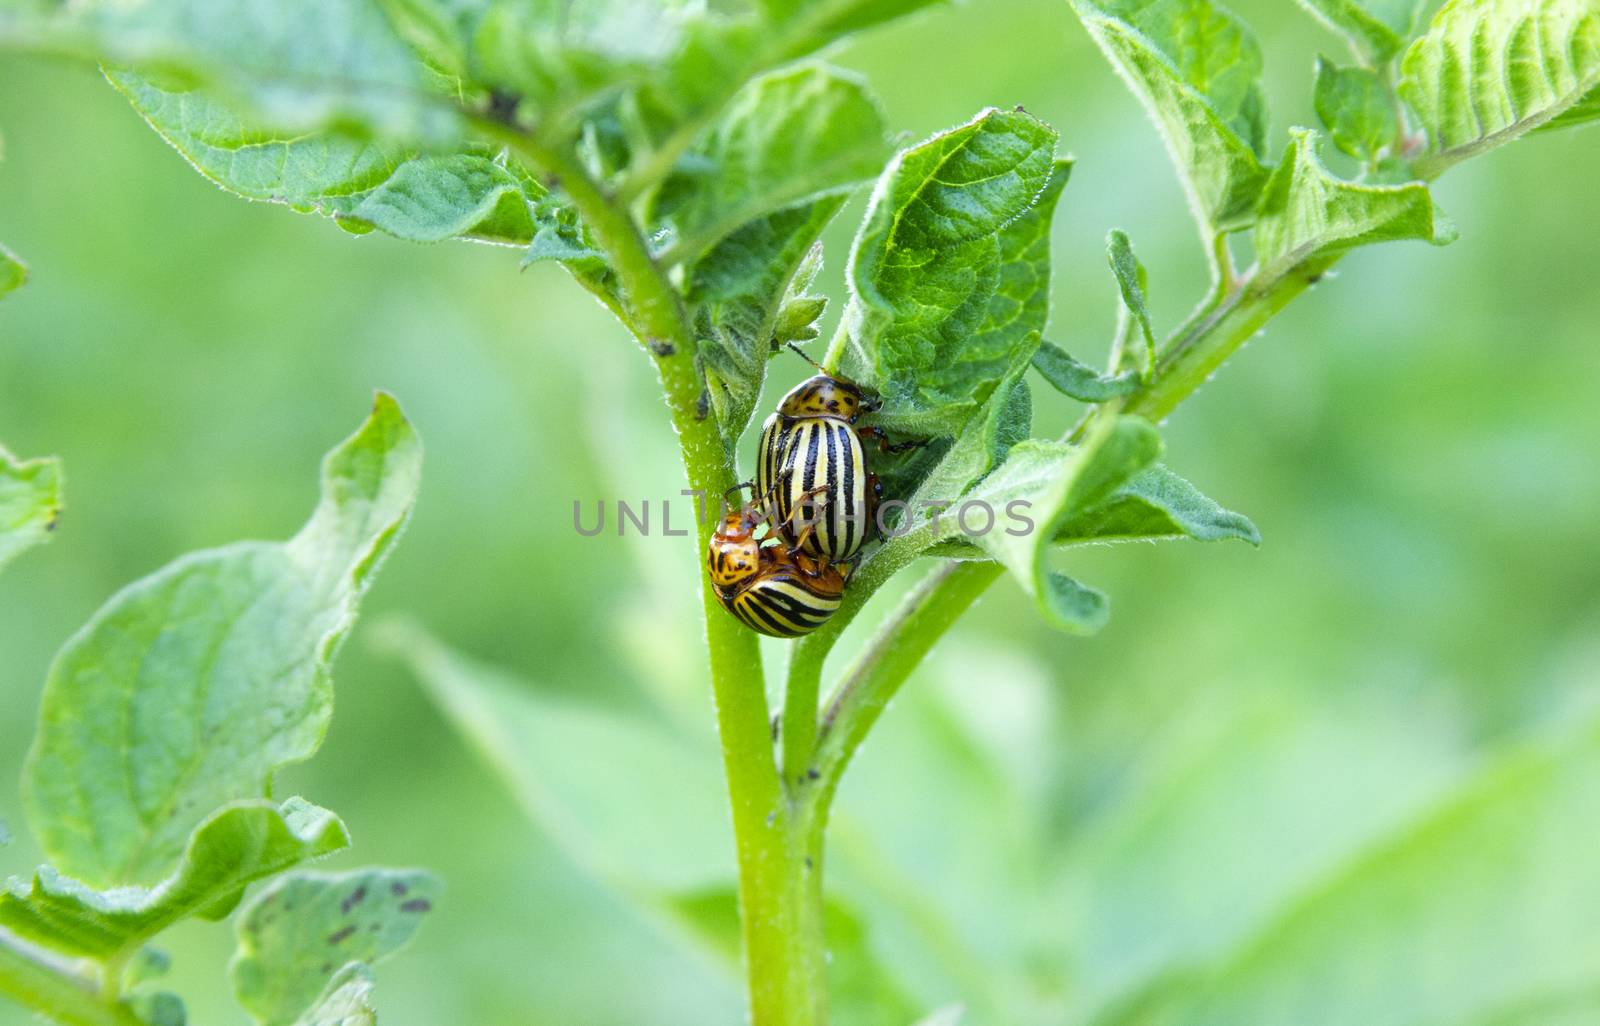 Couple of Colorado potato beetles have sex on the leaves of a potato bush at the summer day. Pest on the plants. Agricultures problem. Crop failure